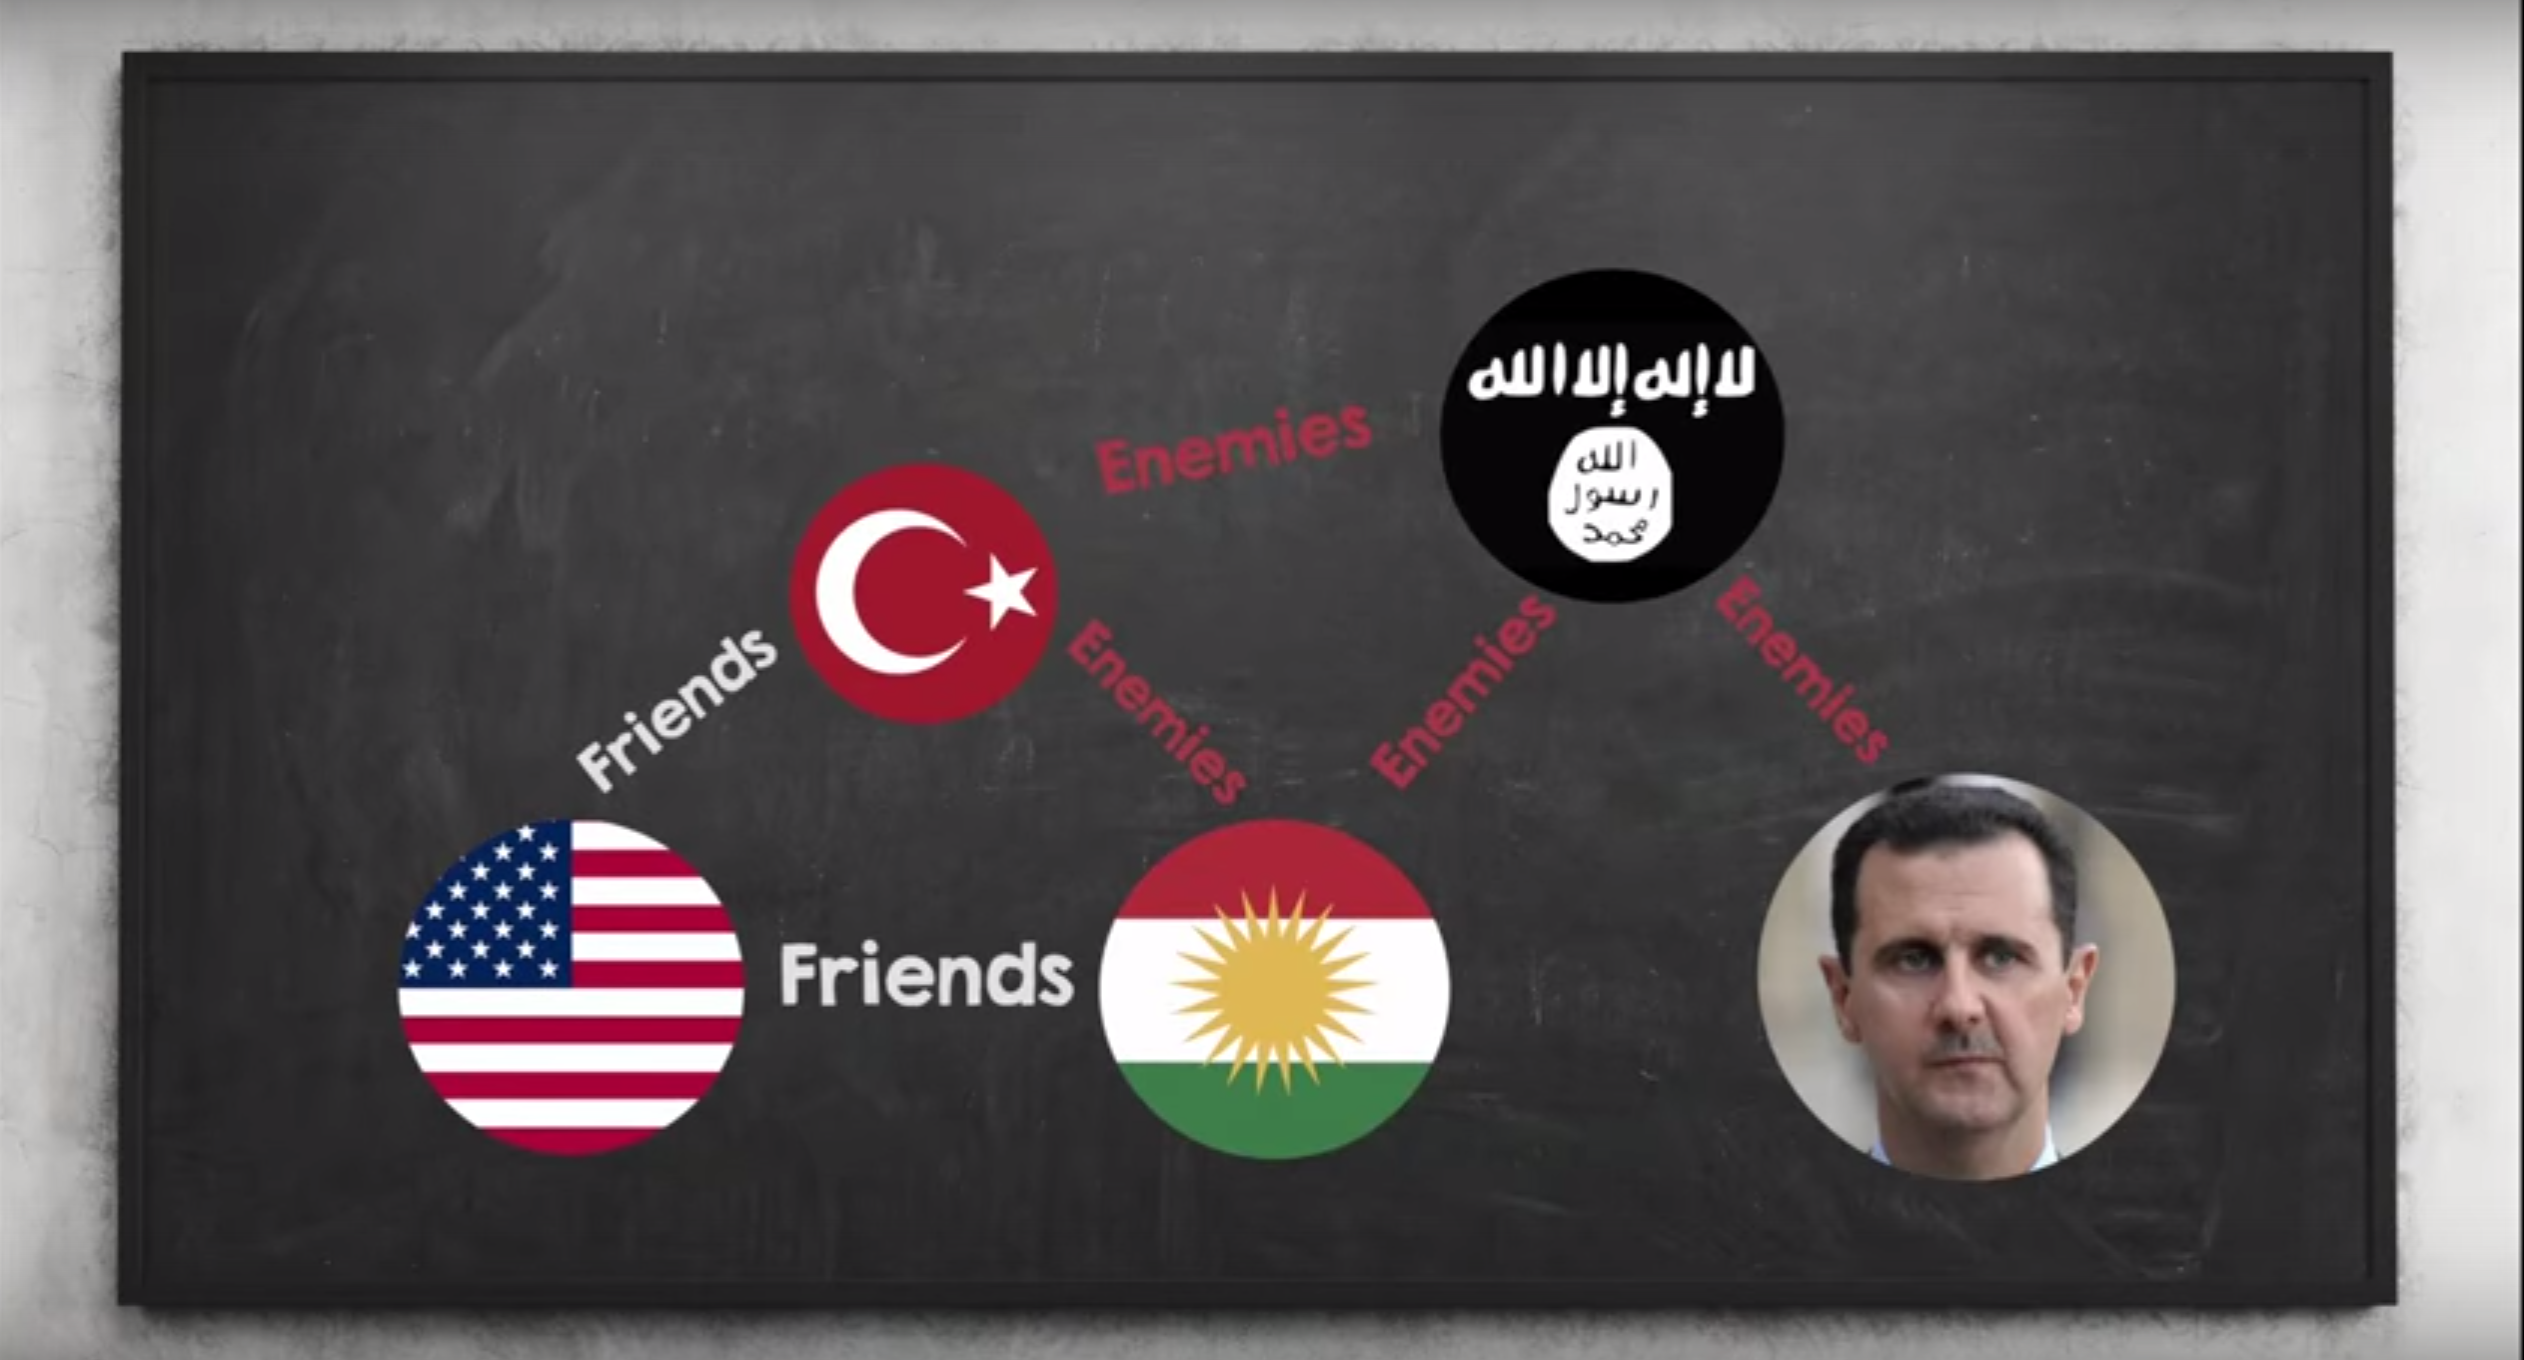 Screenshot from BBC's "Who's fighting whom in Syria? Explained in 90 seconds" video